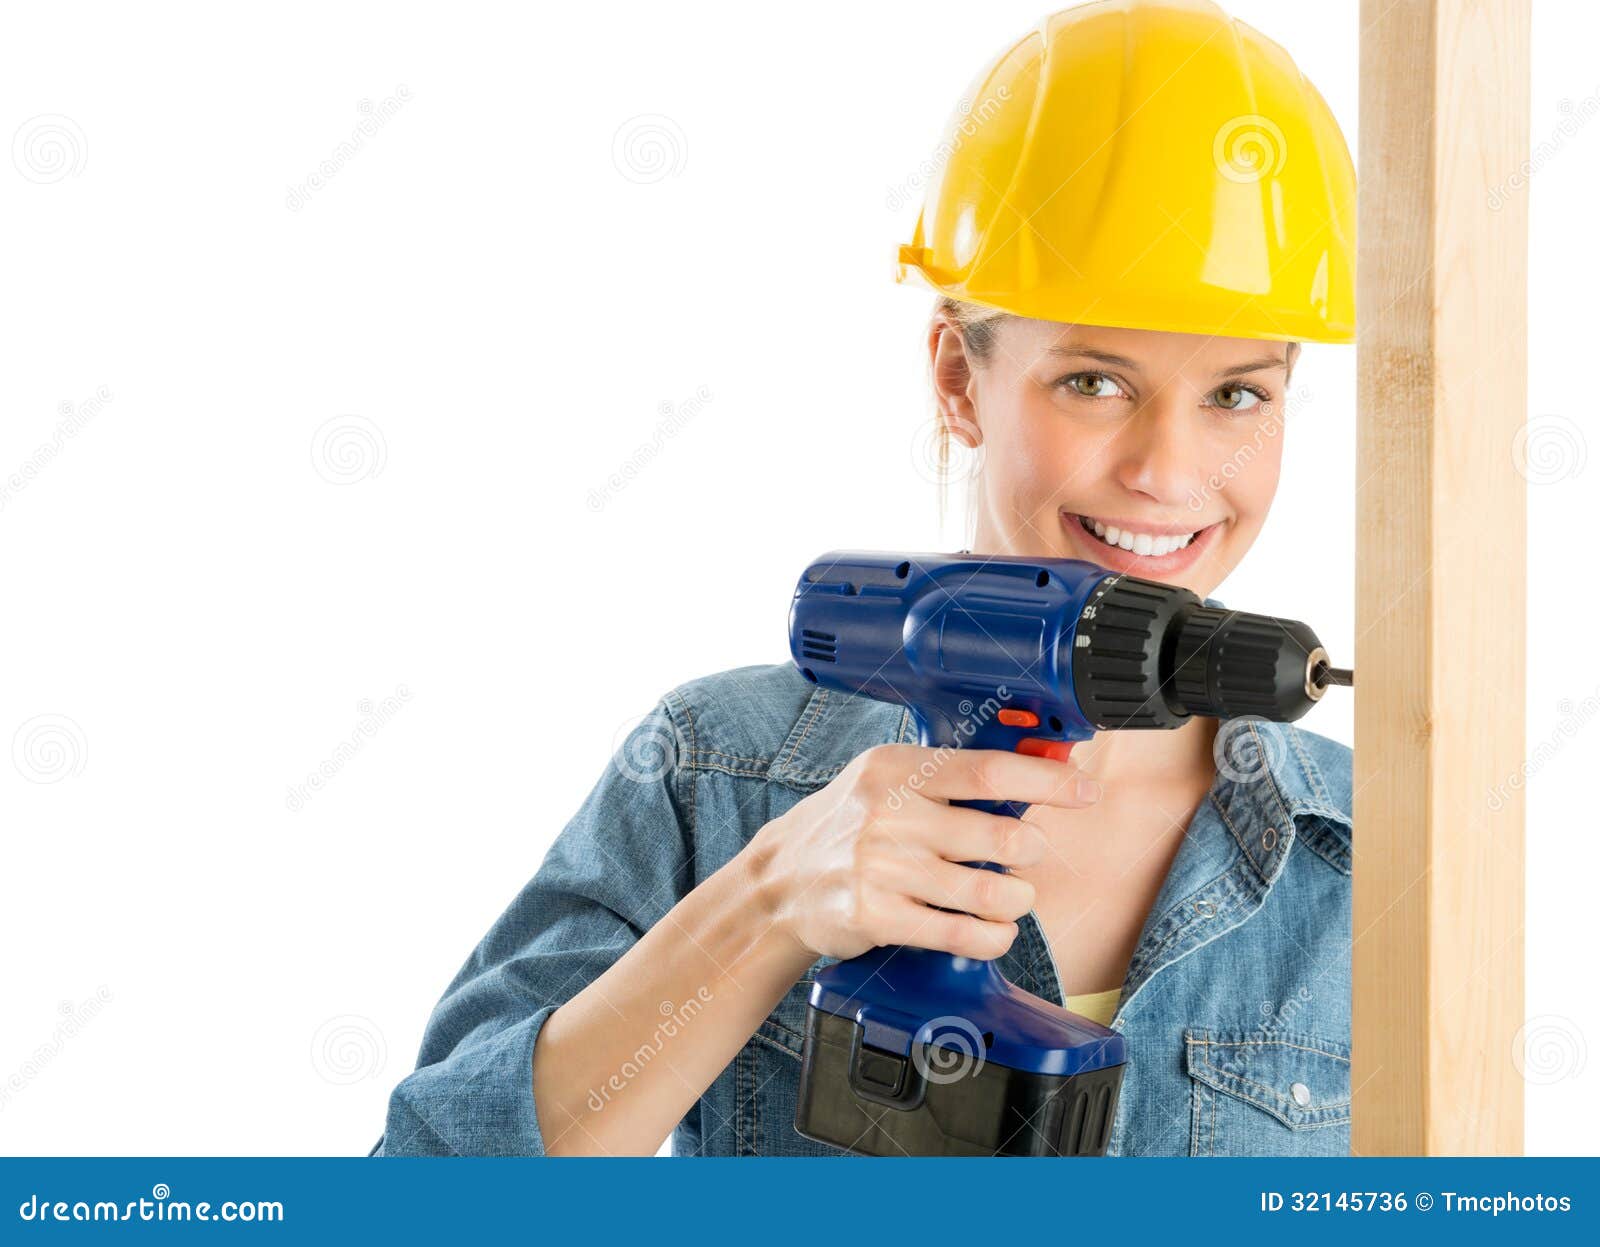 construction-worker-using-power-drill-wooden-plank-portrait-beautiful-isolated-over-white-background-32145736.jpg